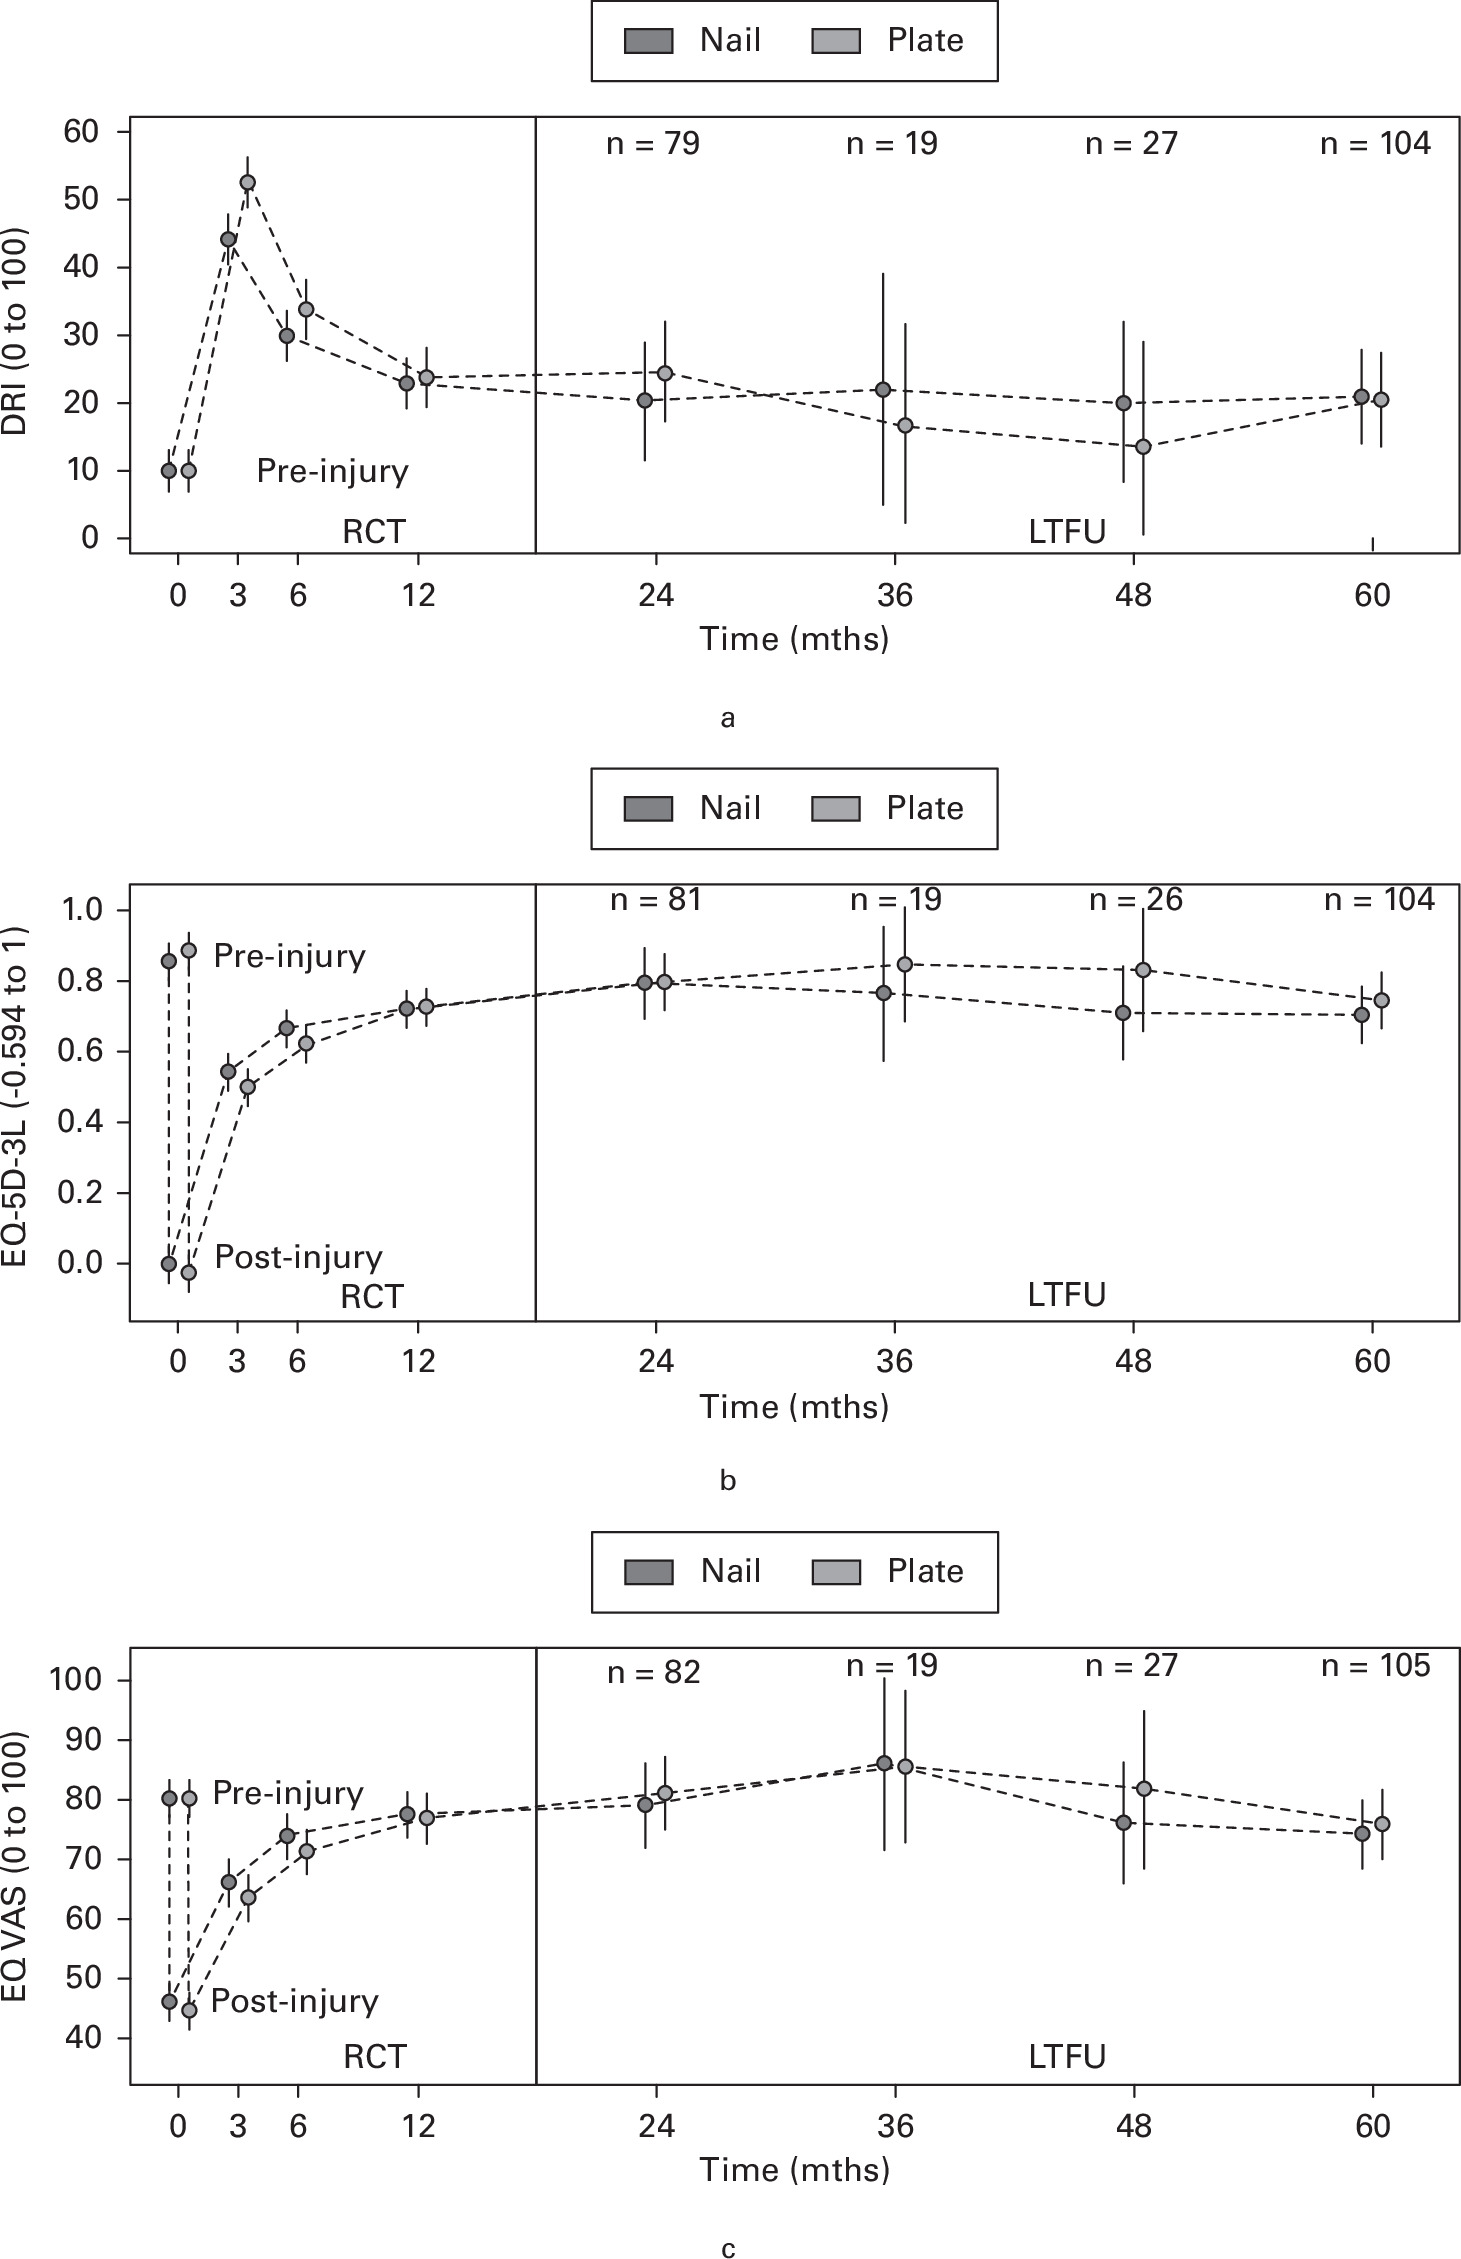 Fig. 1 
            Five-year outcomes for patients with a displaced fracture of the distal tibia. Temporal trends for a) Disability Rating Index (DRI), b) EuroQol five-dimension three-level questionnaire (EQ-5D-3L), and c) EuroQol visual analogue scale (EQ VAS) scores during the main randomized clinical trial (RCT) and longer-term follow-up (LTFU) by RCT intervention group (nail and plate); plotted as means and 95% confidence intervals.
          